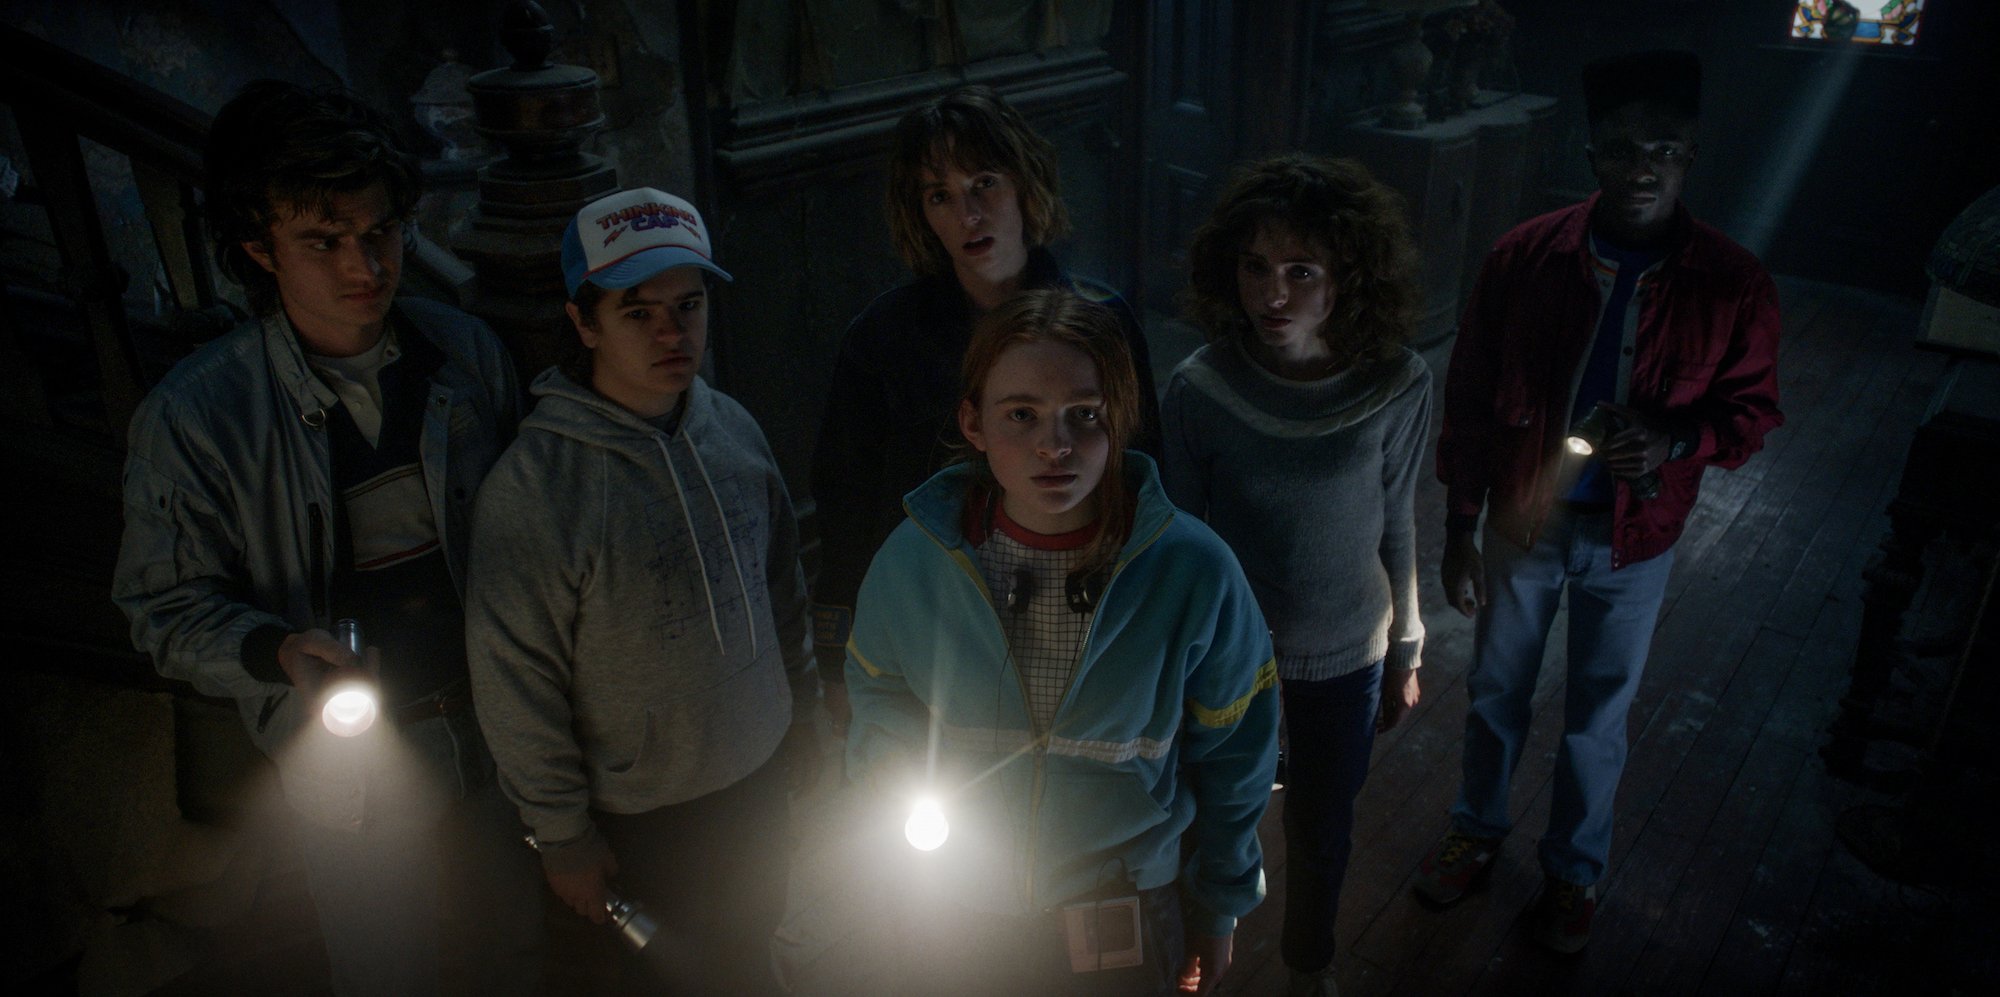 'Stranger Things' Season 4 image shows several of the characters holding flashlights and looking up at something inside the Creel House.